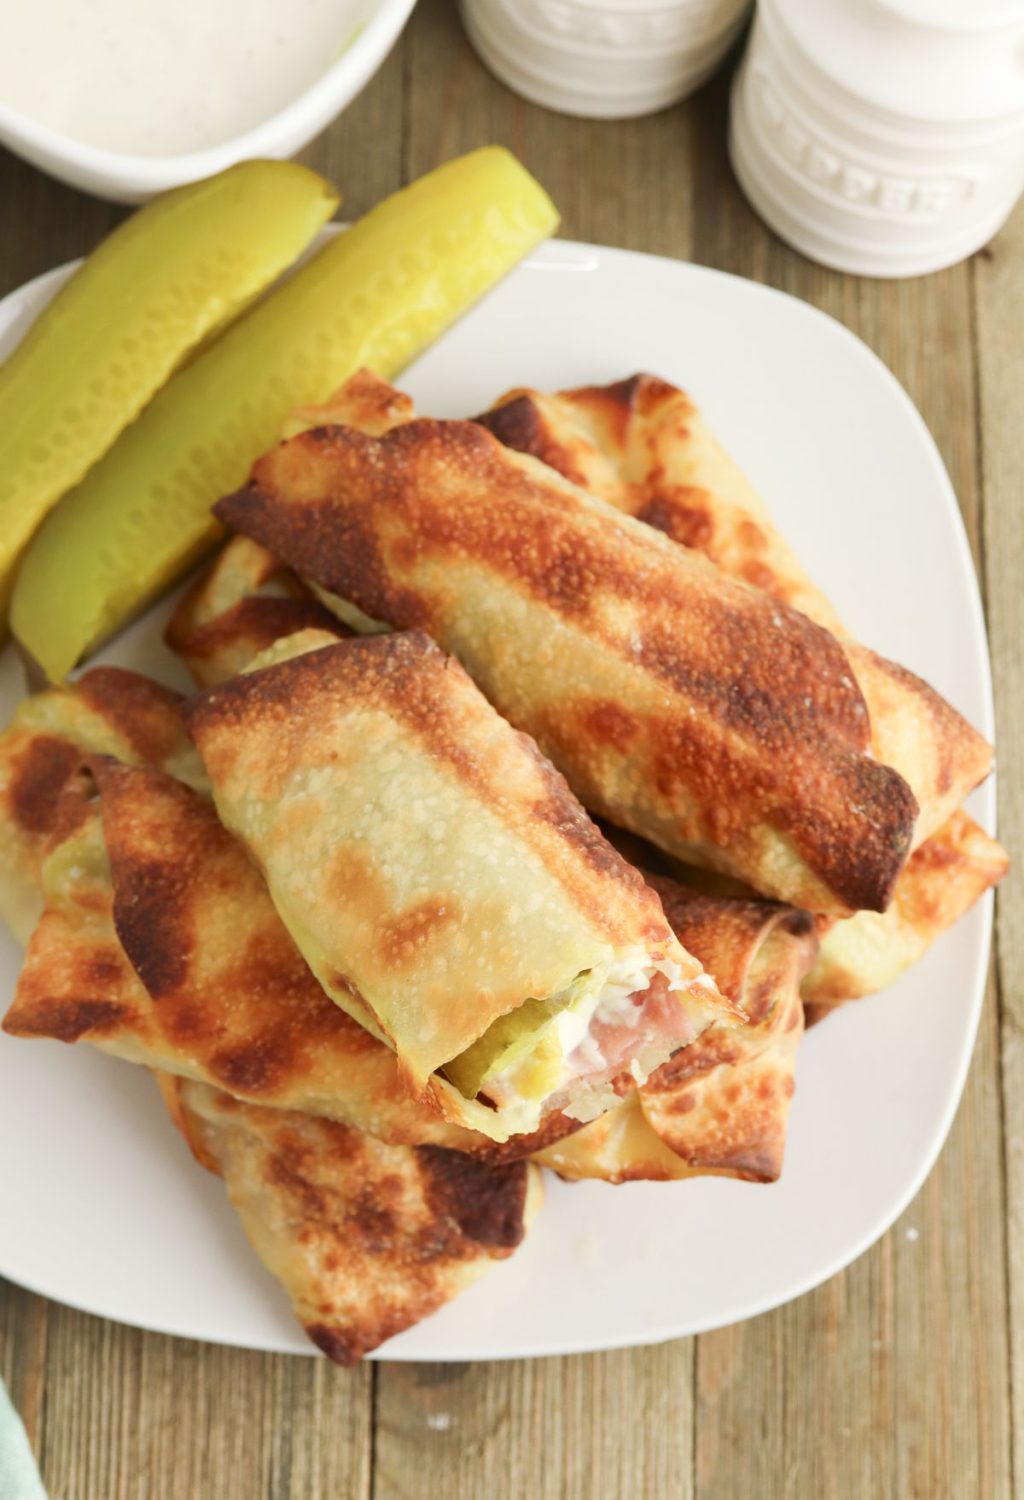 Ham and cheese quesadillas on a plate with pickles.